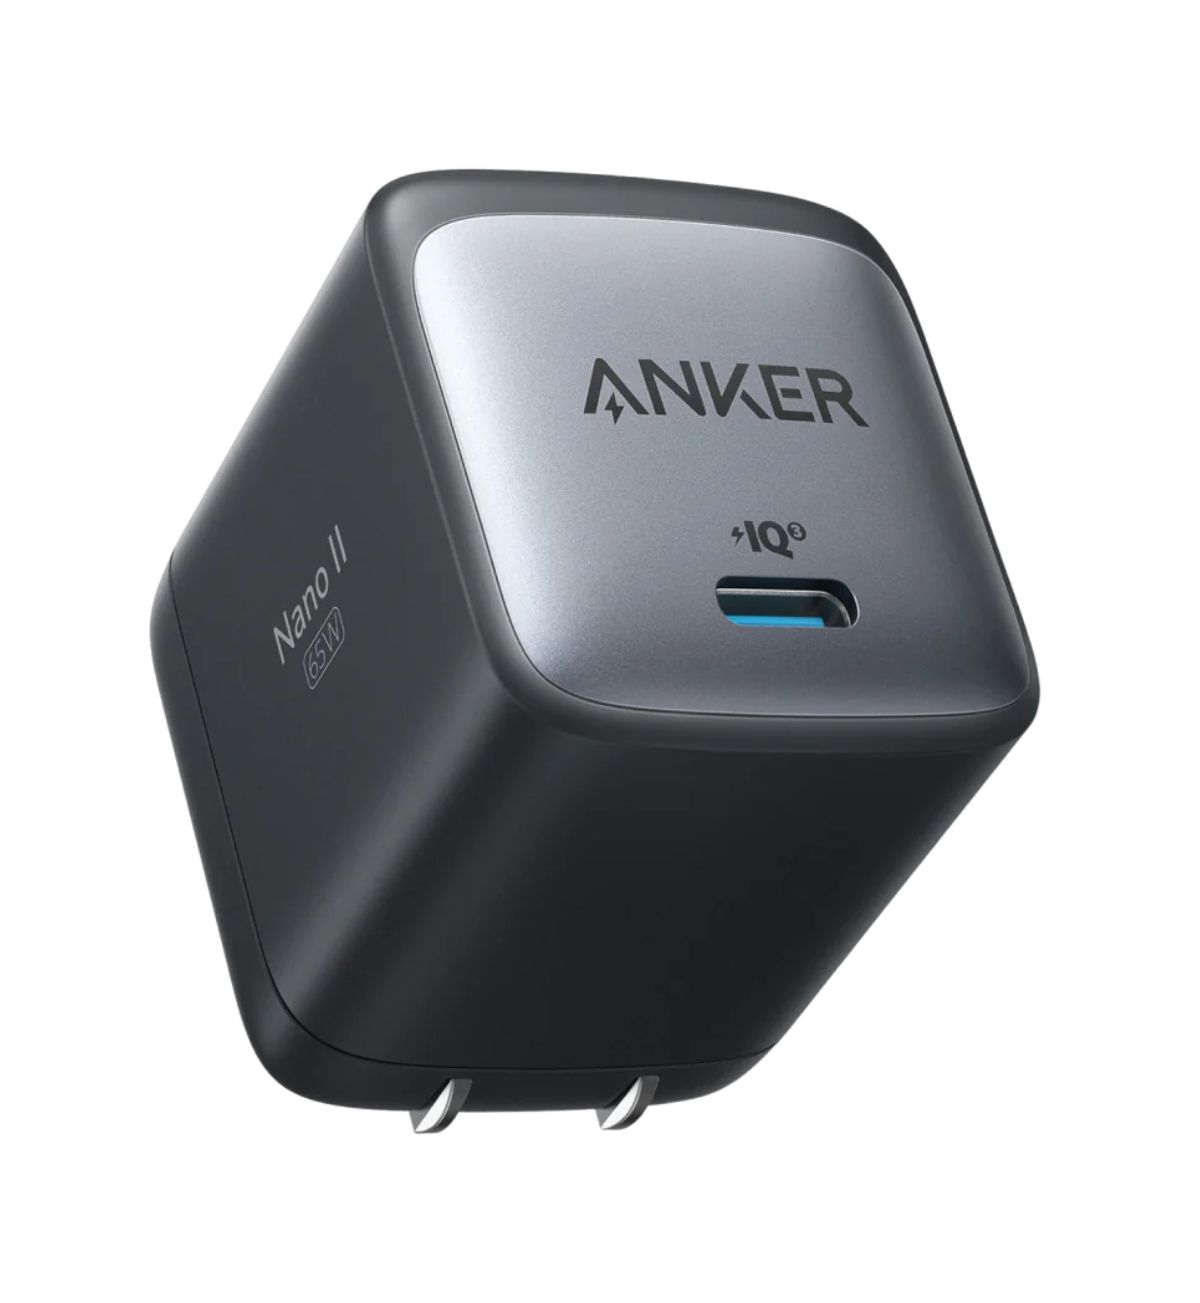 Close-up image of the Anker 715 (Nano II 65W) highlighting its compact size, foldable plug, and USB-C PD port. Text overlay: "GaN II technology for ultra-compact power.